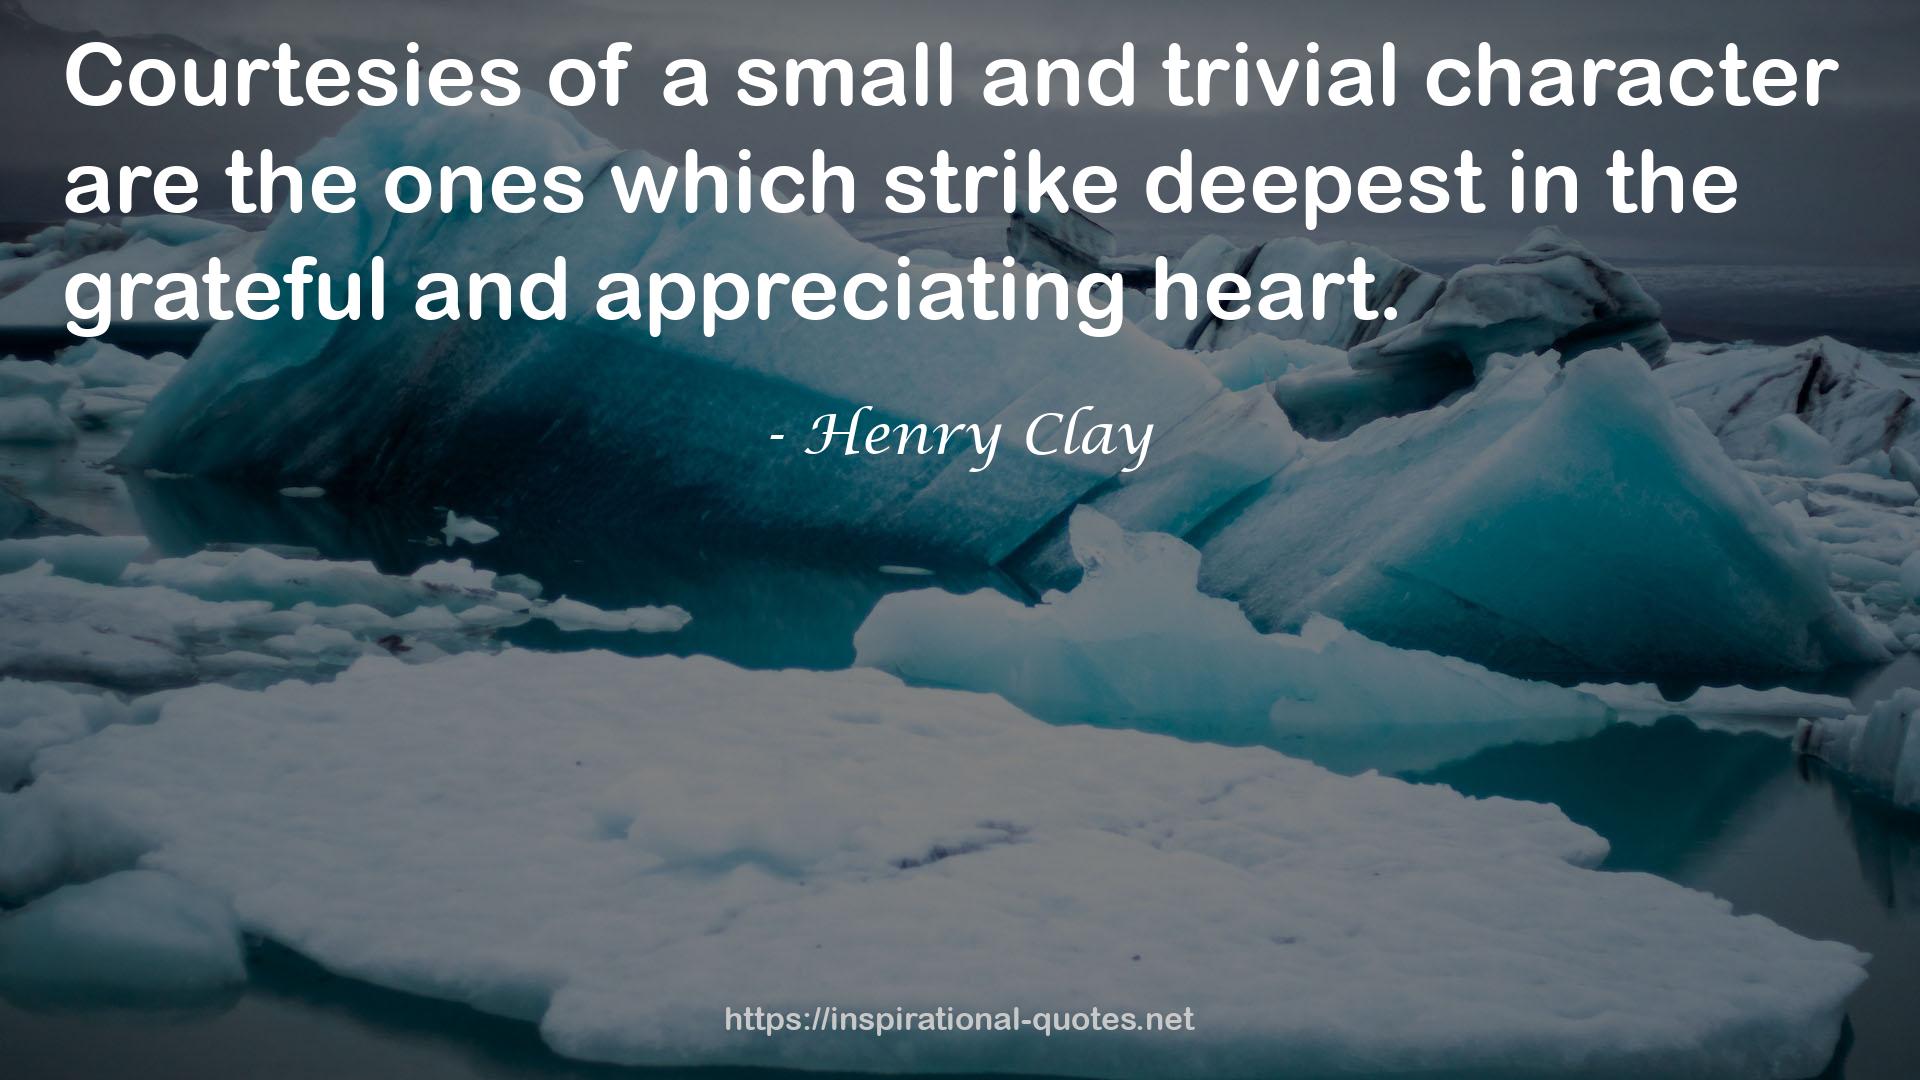 Henry Clay QUOTES